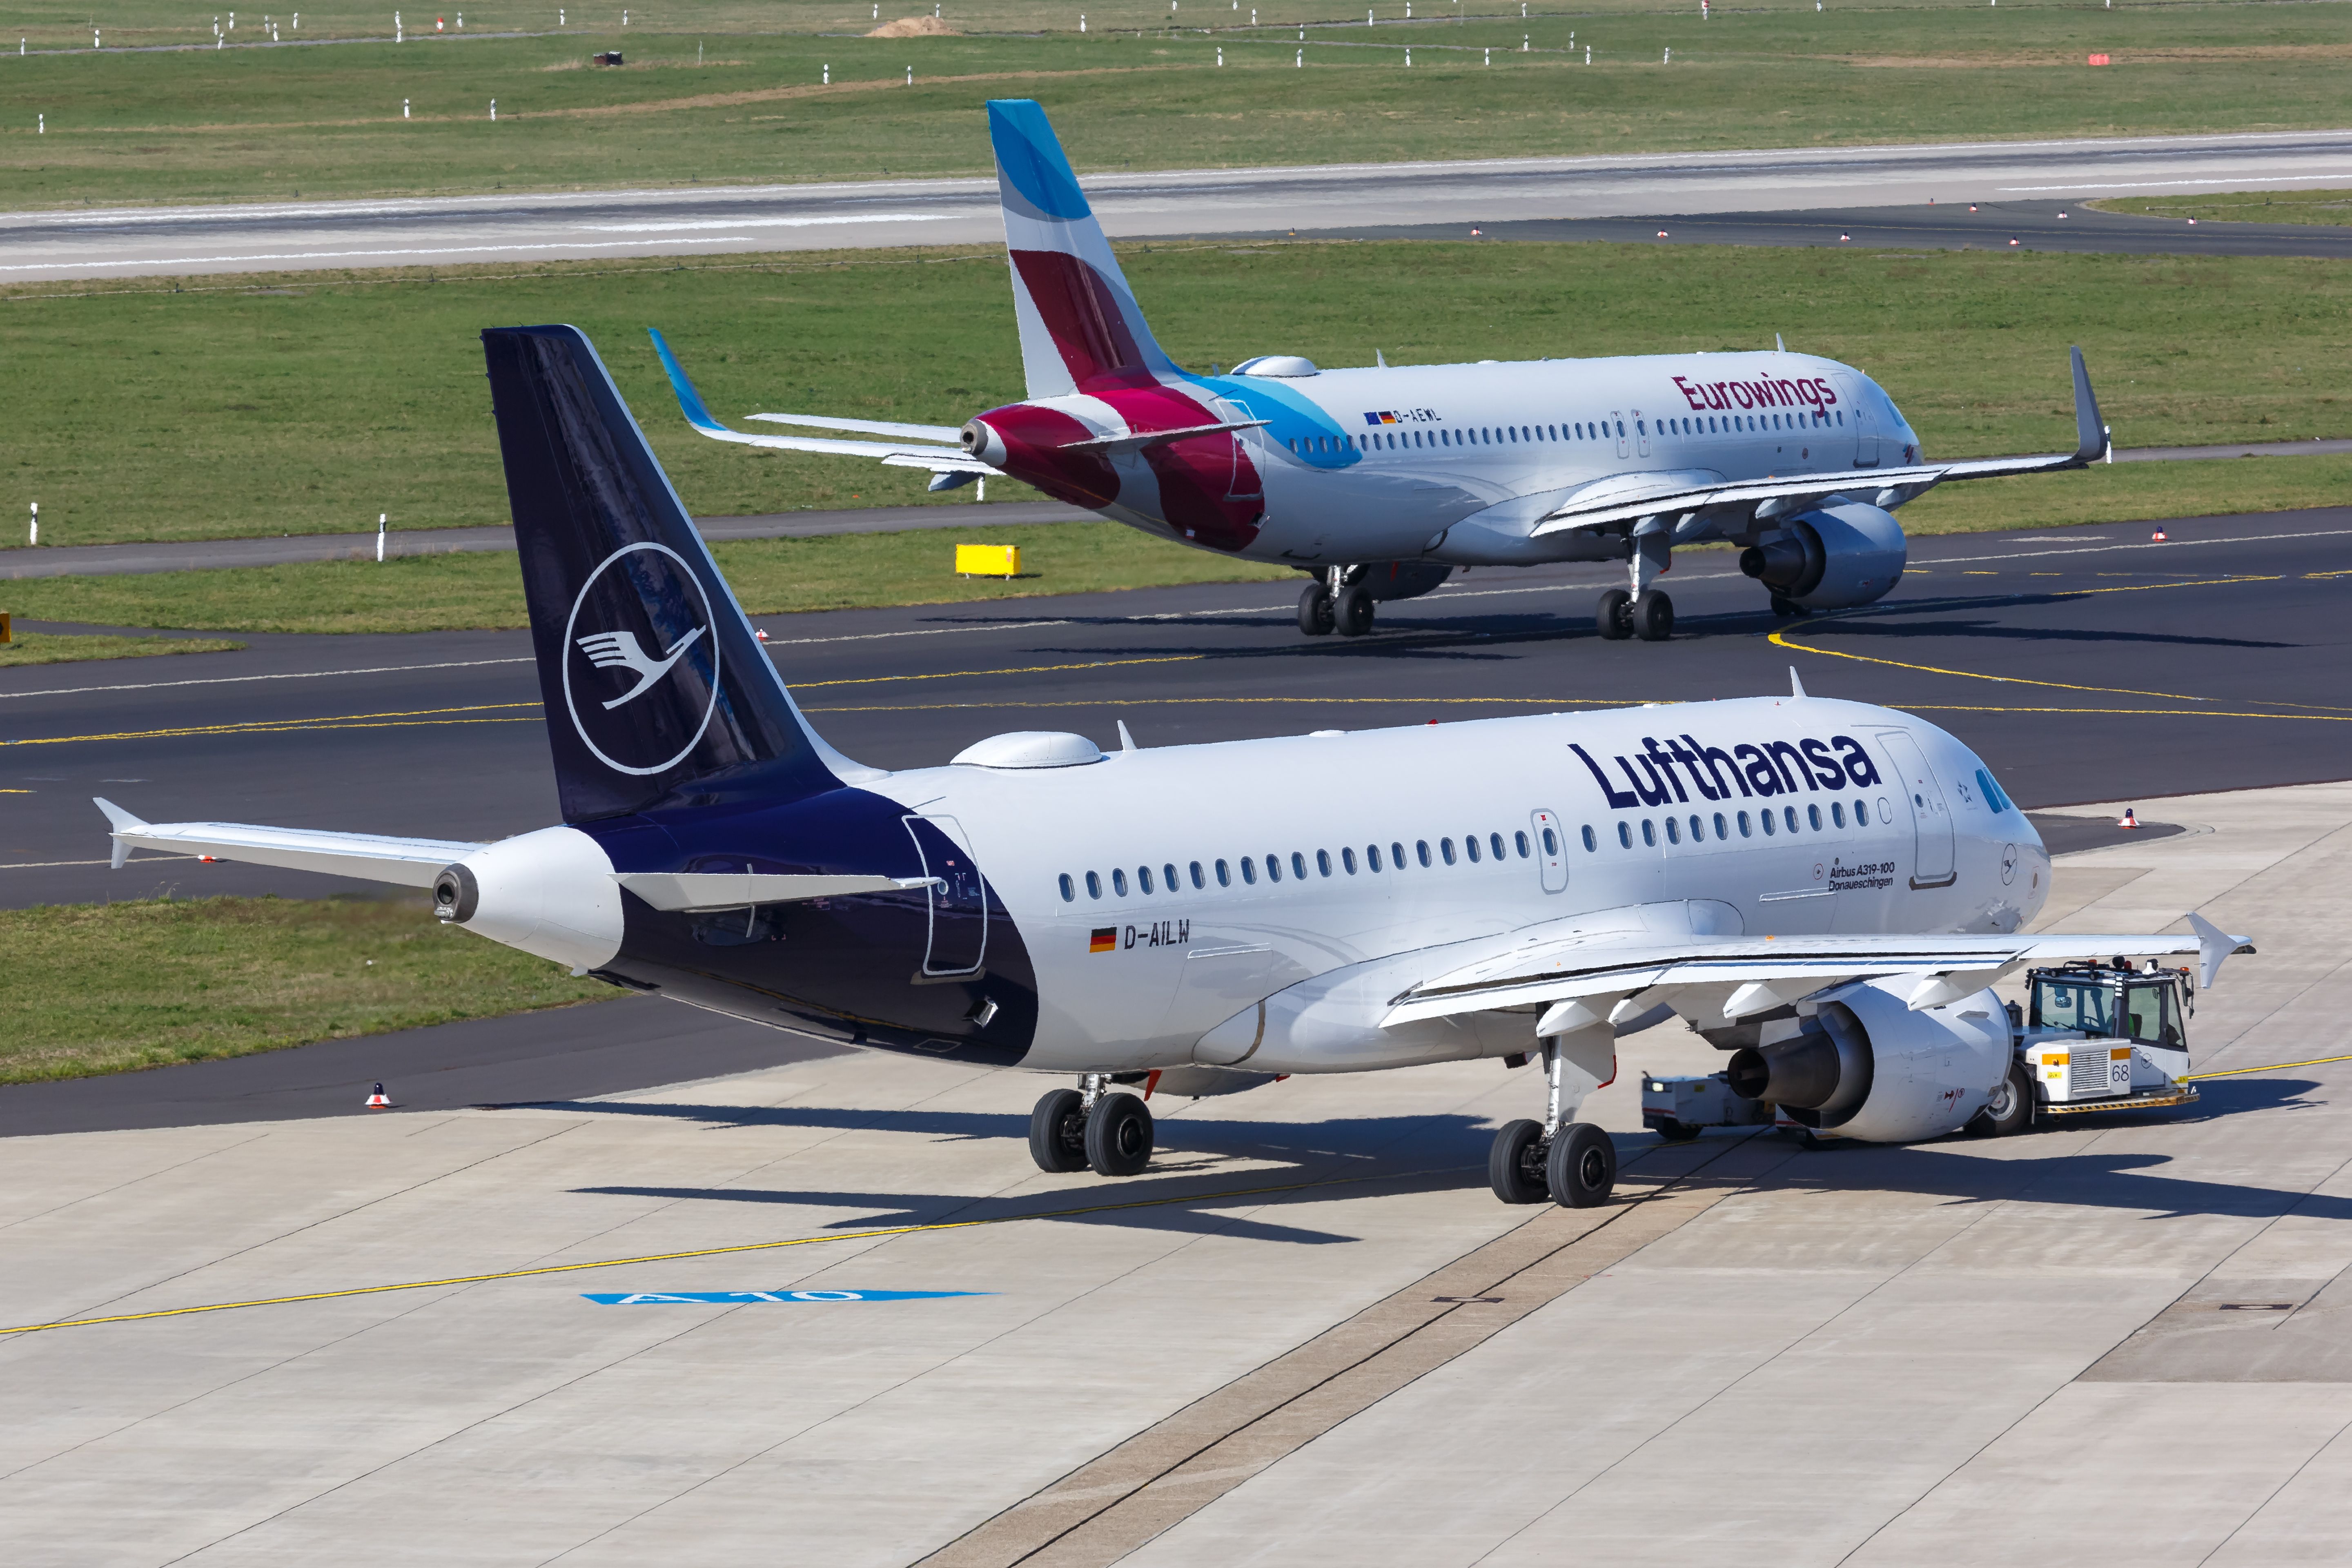 Lufthansa and Eurowings aircraft at Dusseldorf Airport DUS shutterstock_1487054102